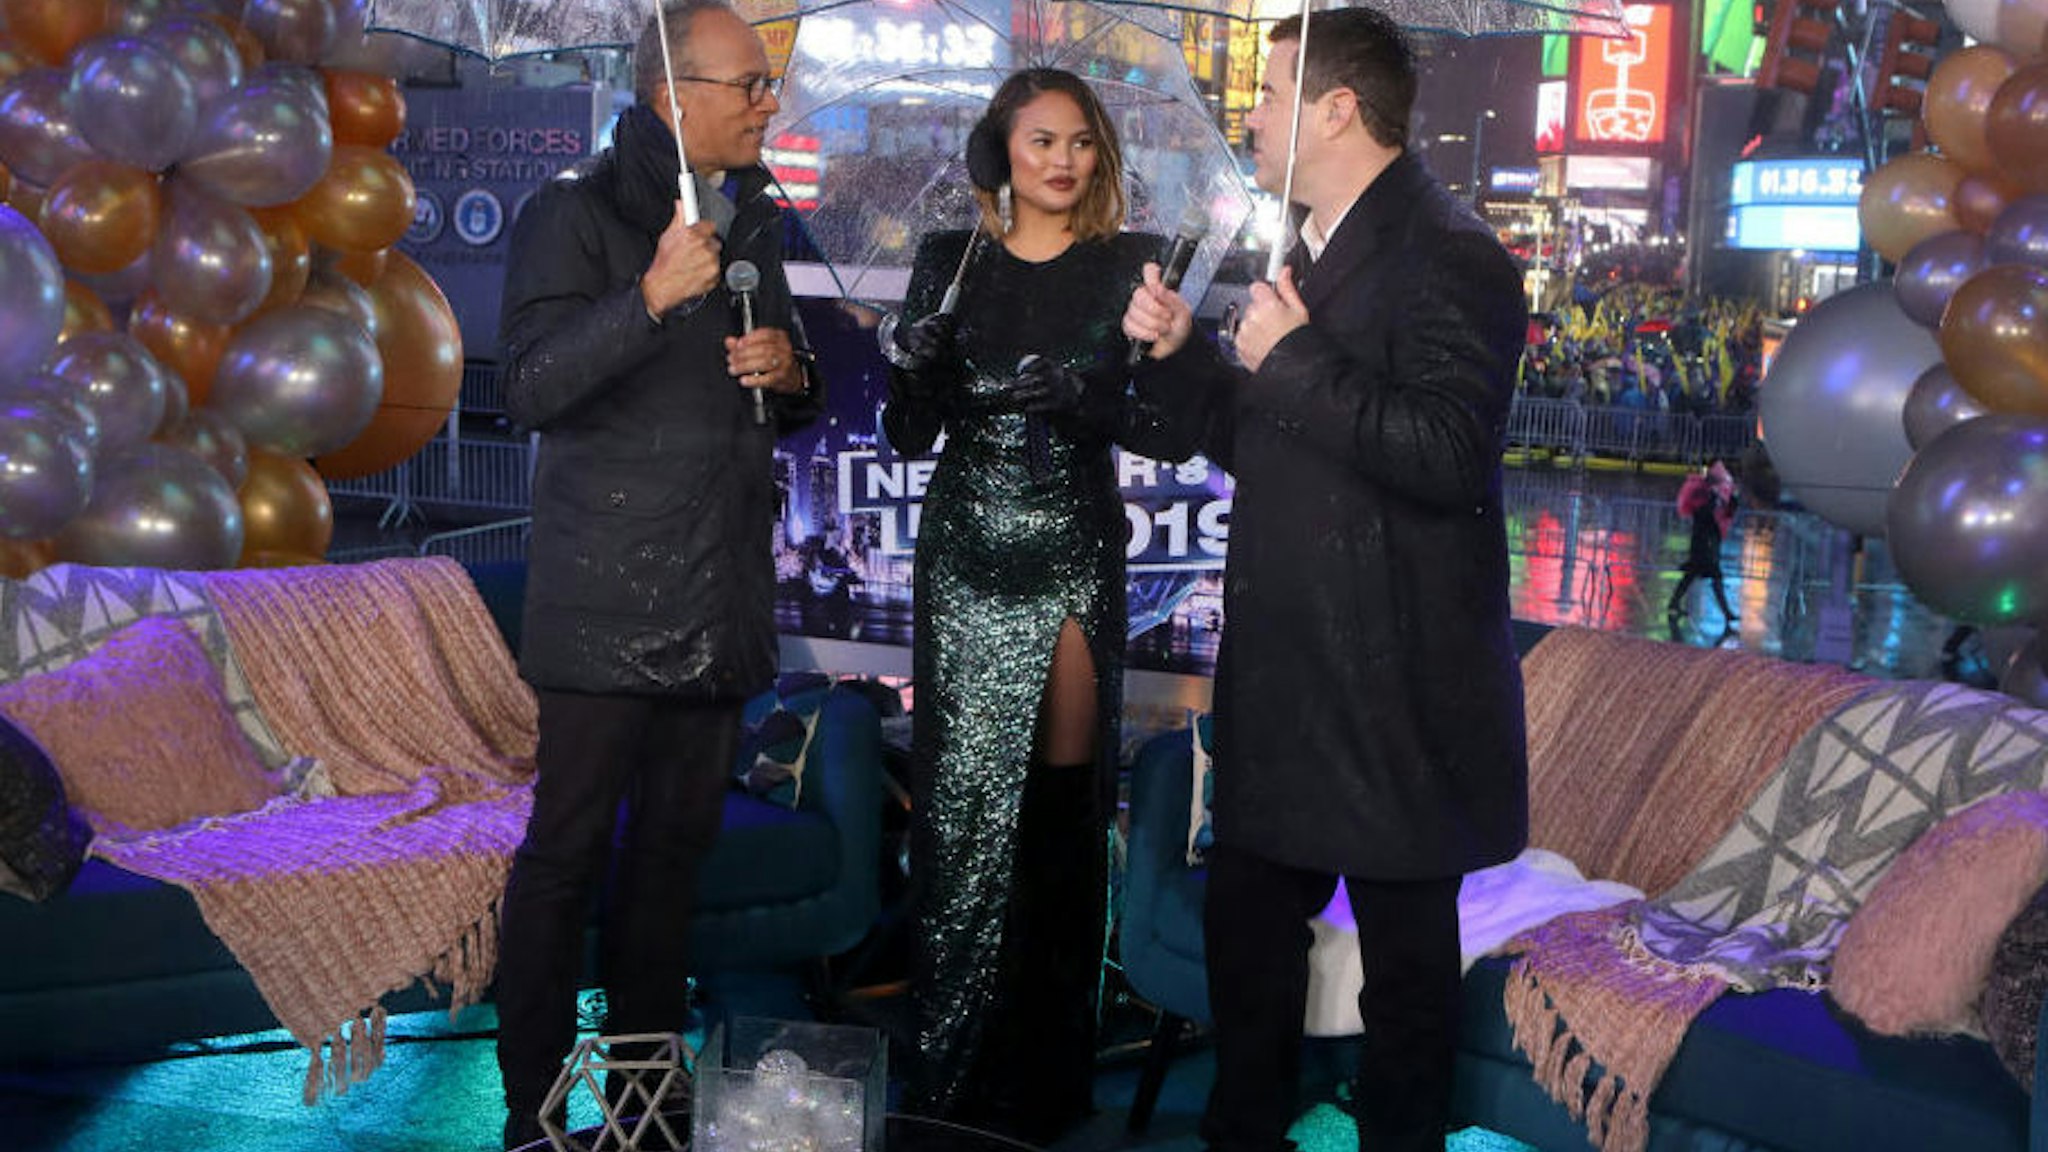 NBC'S NEW YEAR'S EVE -- Pictured: (l-r) Lester Holt, Chrissy Teigen, and Carson Daly during NBC's New Year's Eve --